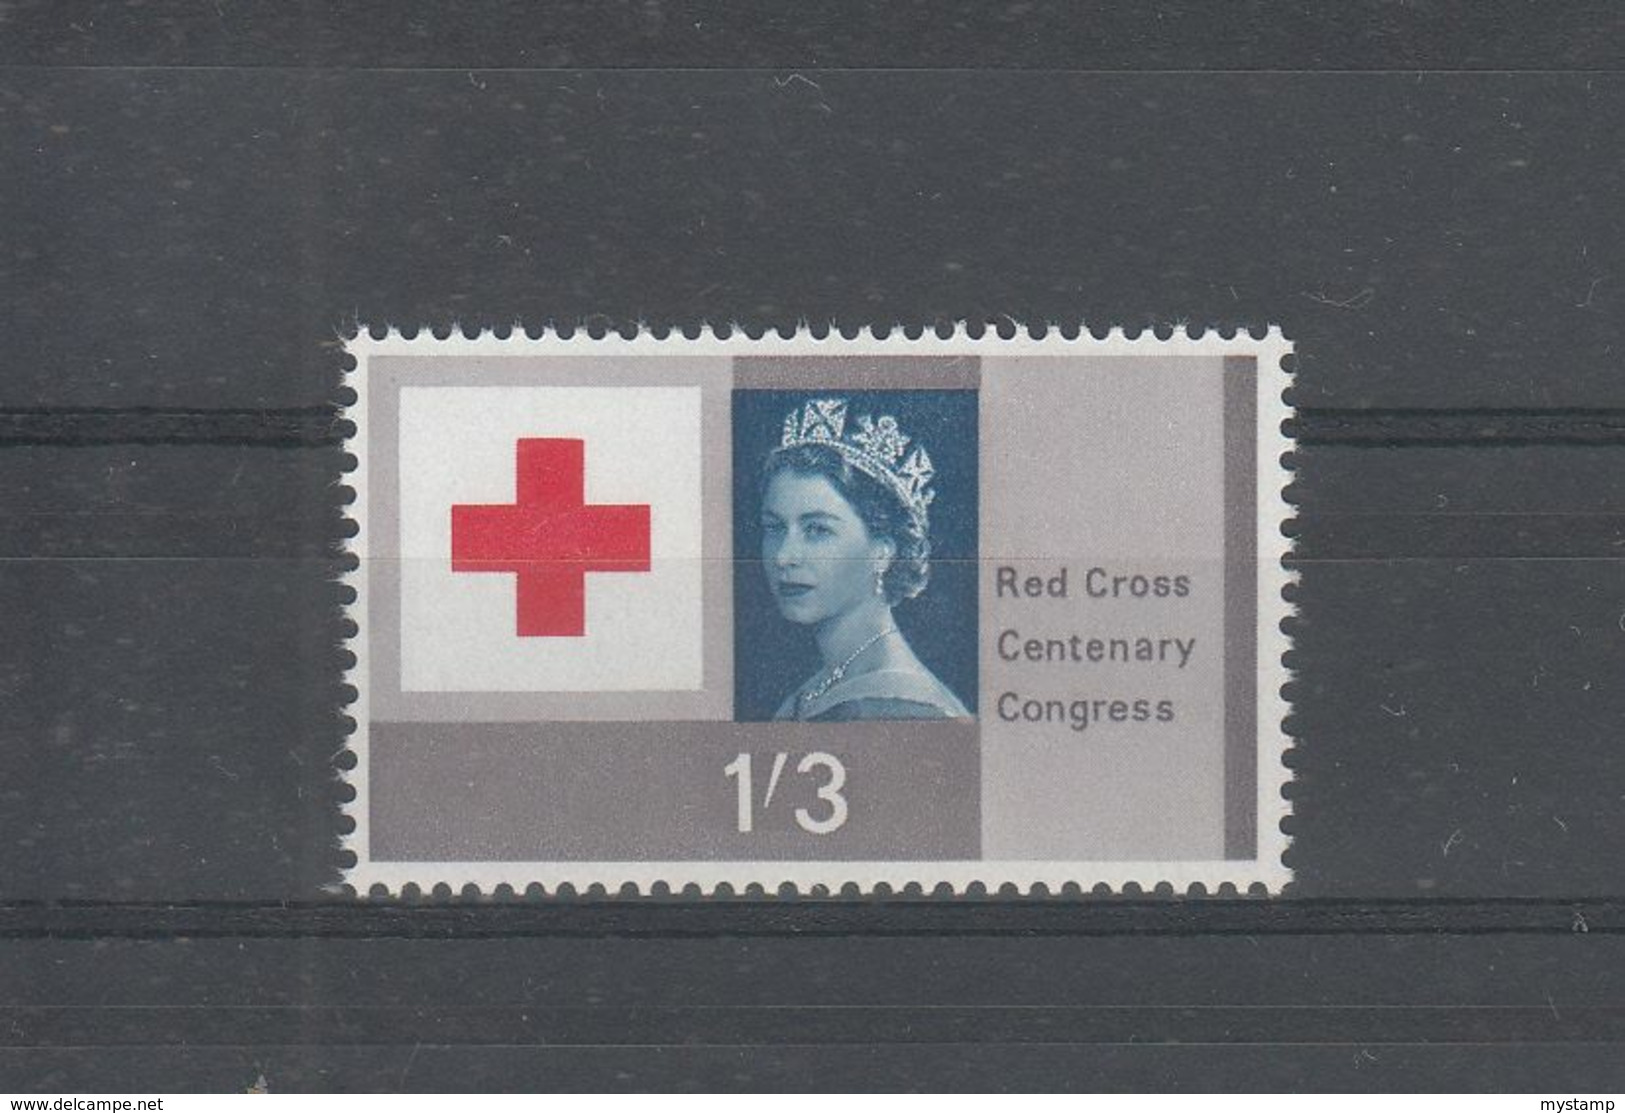 GREAT BRATIN  RED CROSS STAMP   1V MINT NH - Unclassified